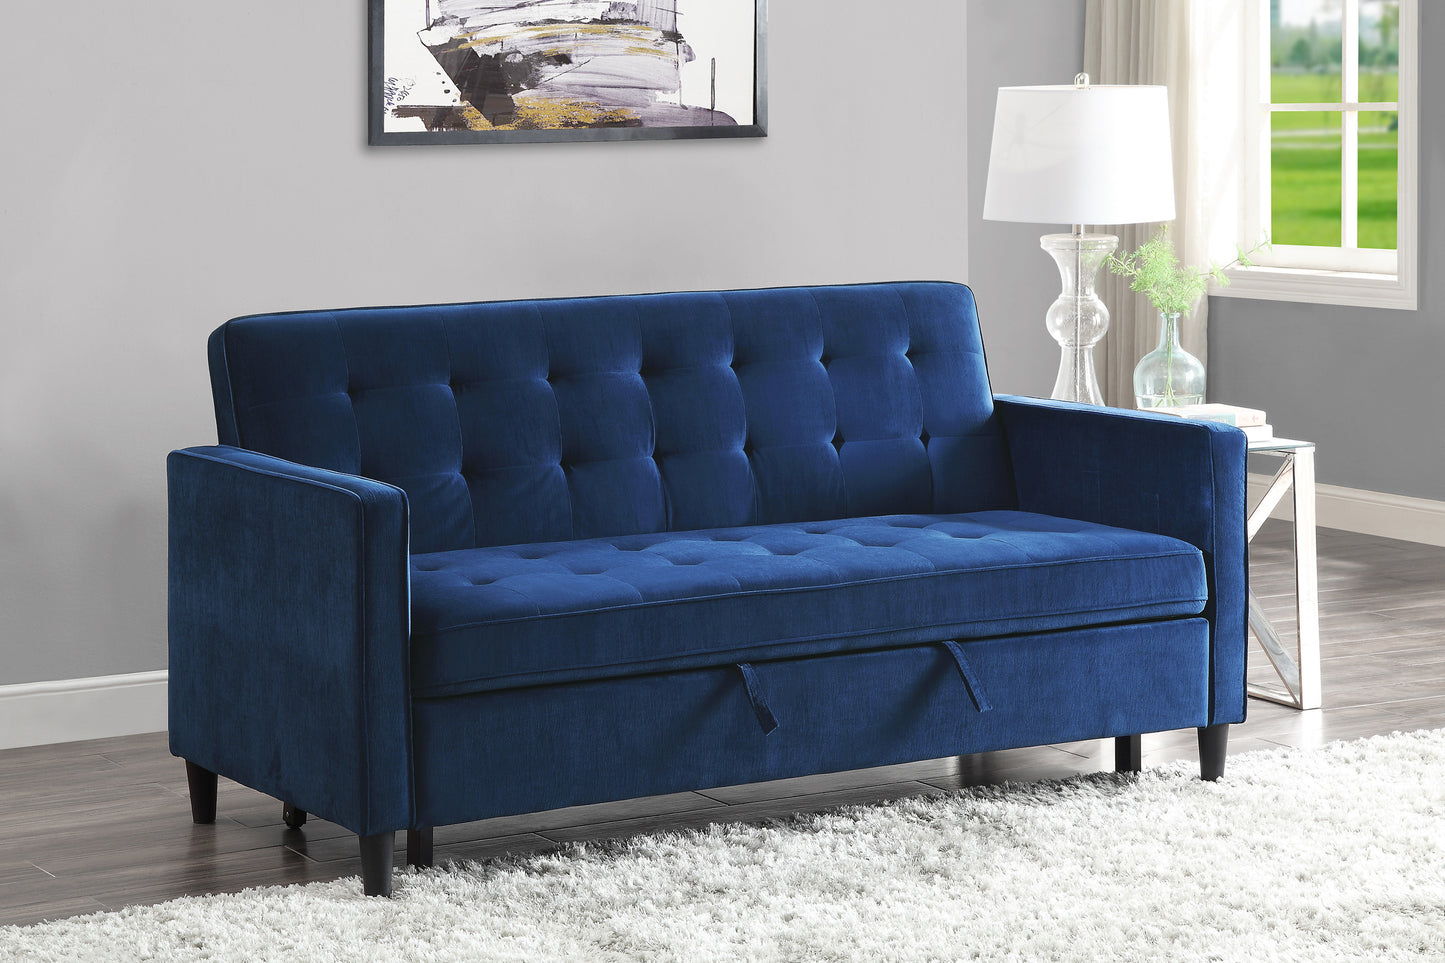 Strader Convertible Studio Sofa with Pull-out Bed NAVY BLUE CLEARANCE LIMITED